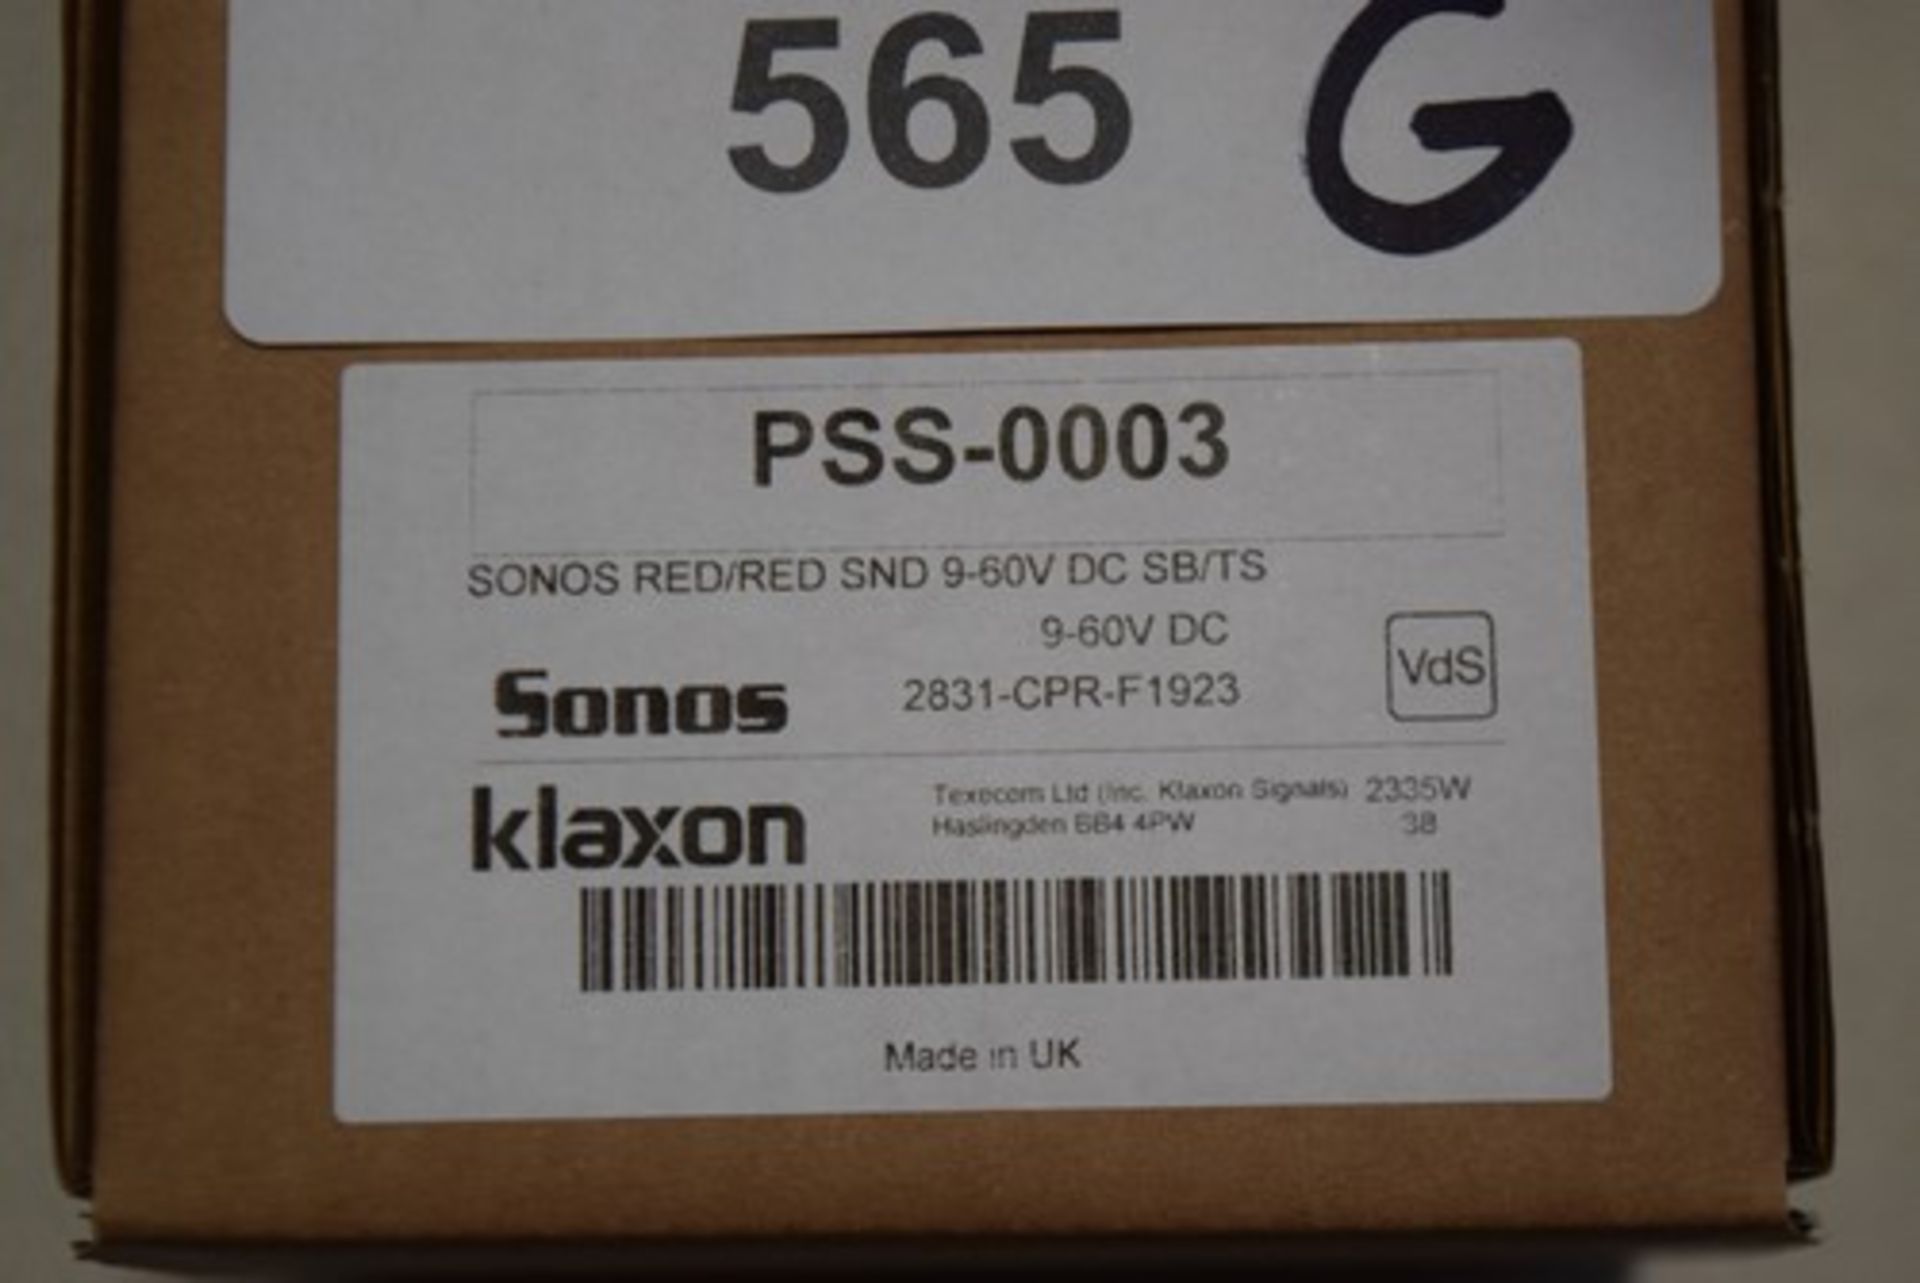 10 x Sonos Klaxon sounders, item No: PSS-0003 - new in box (GS30A) - Image 2 of 2